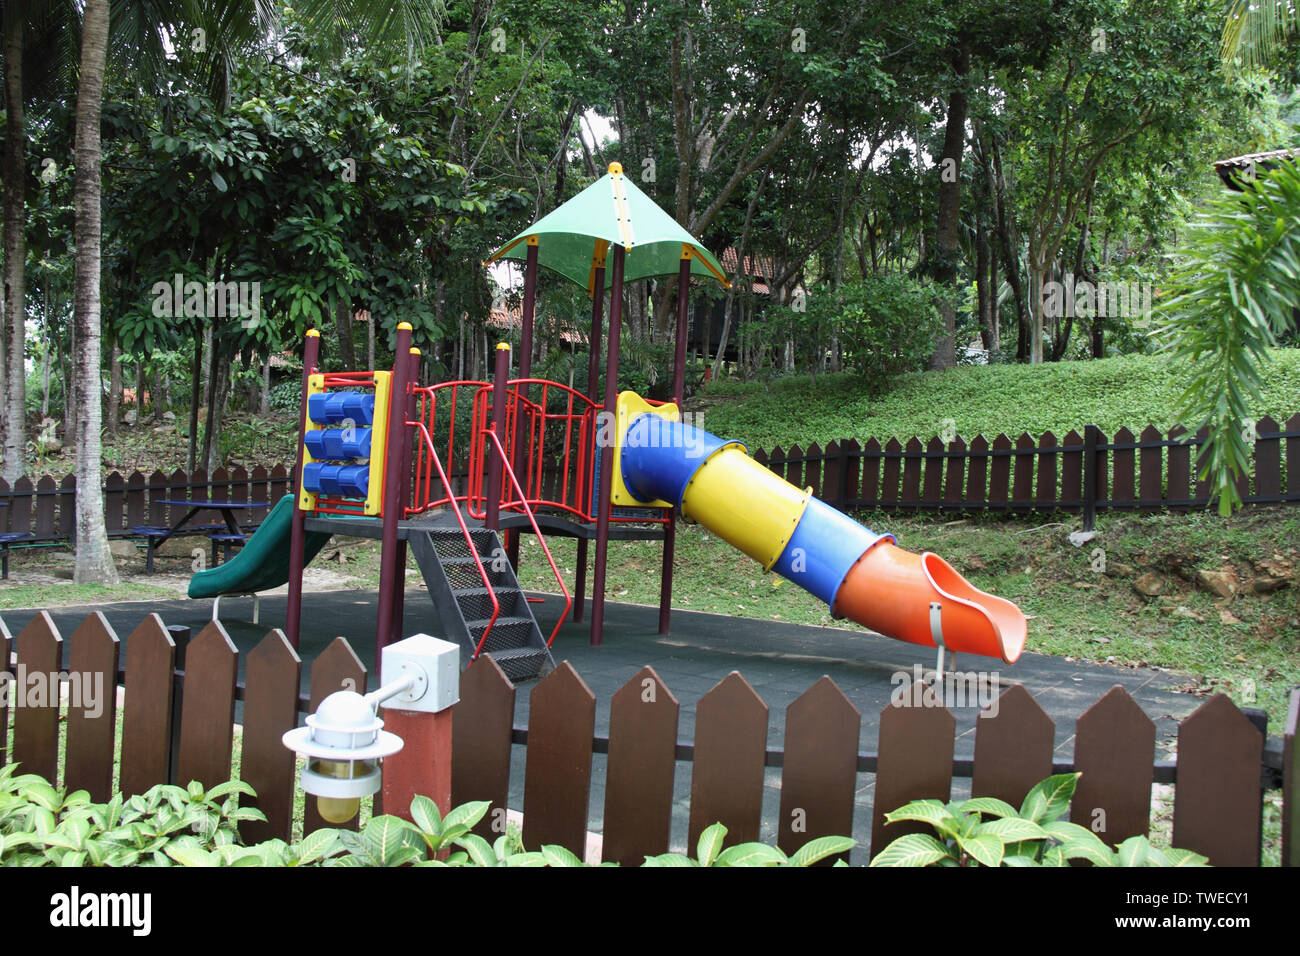 Slide in a playground, Malaysia Stock Photo